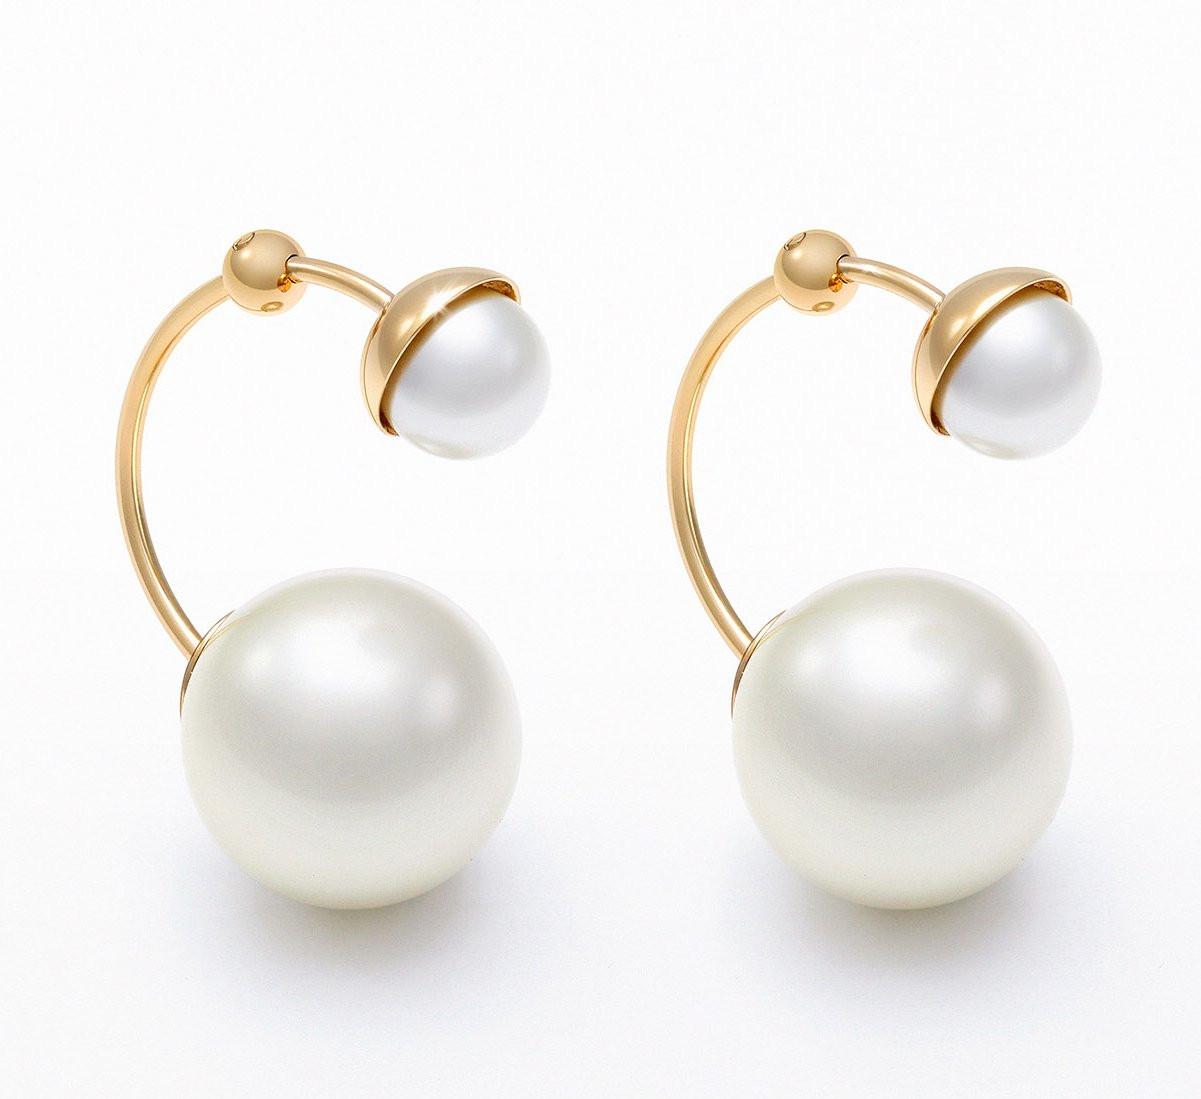 Dior Earrings Price
 Dior UltraDior Pearl Jewelry Reference Guide